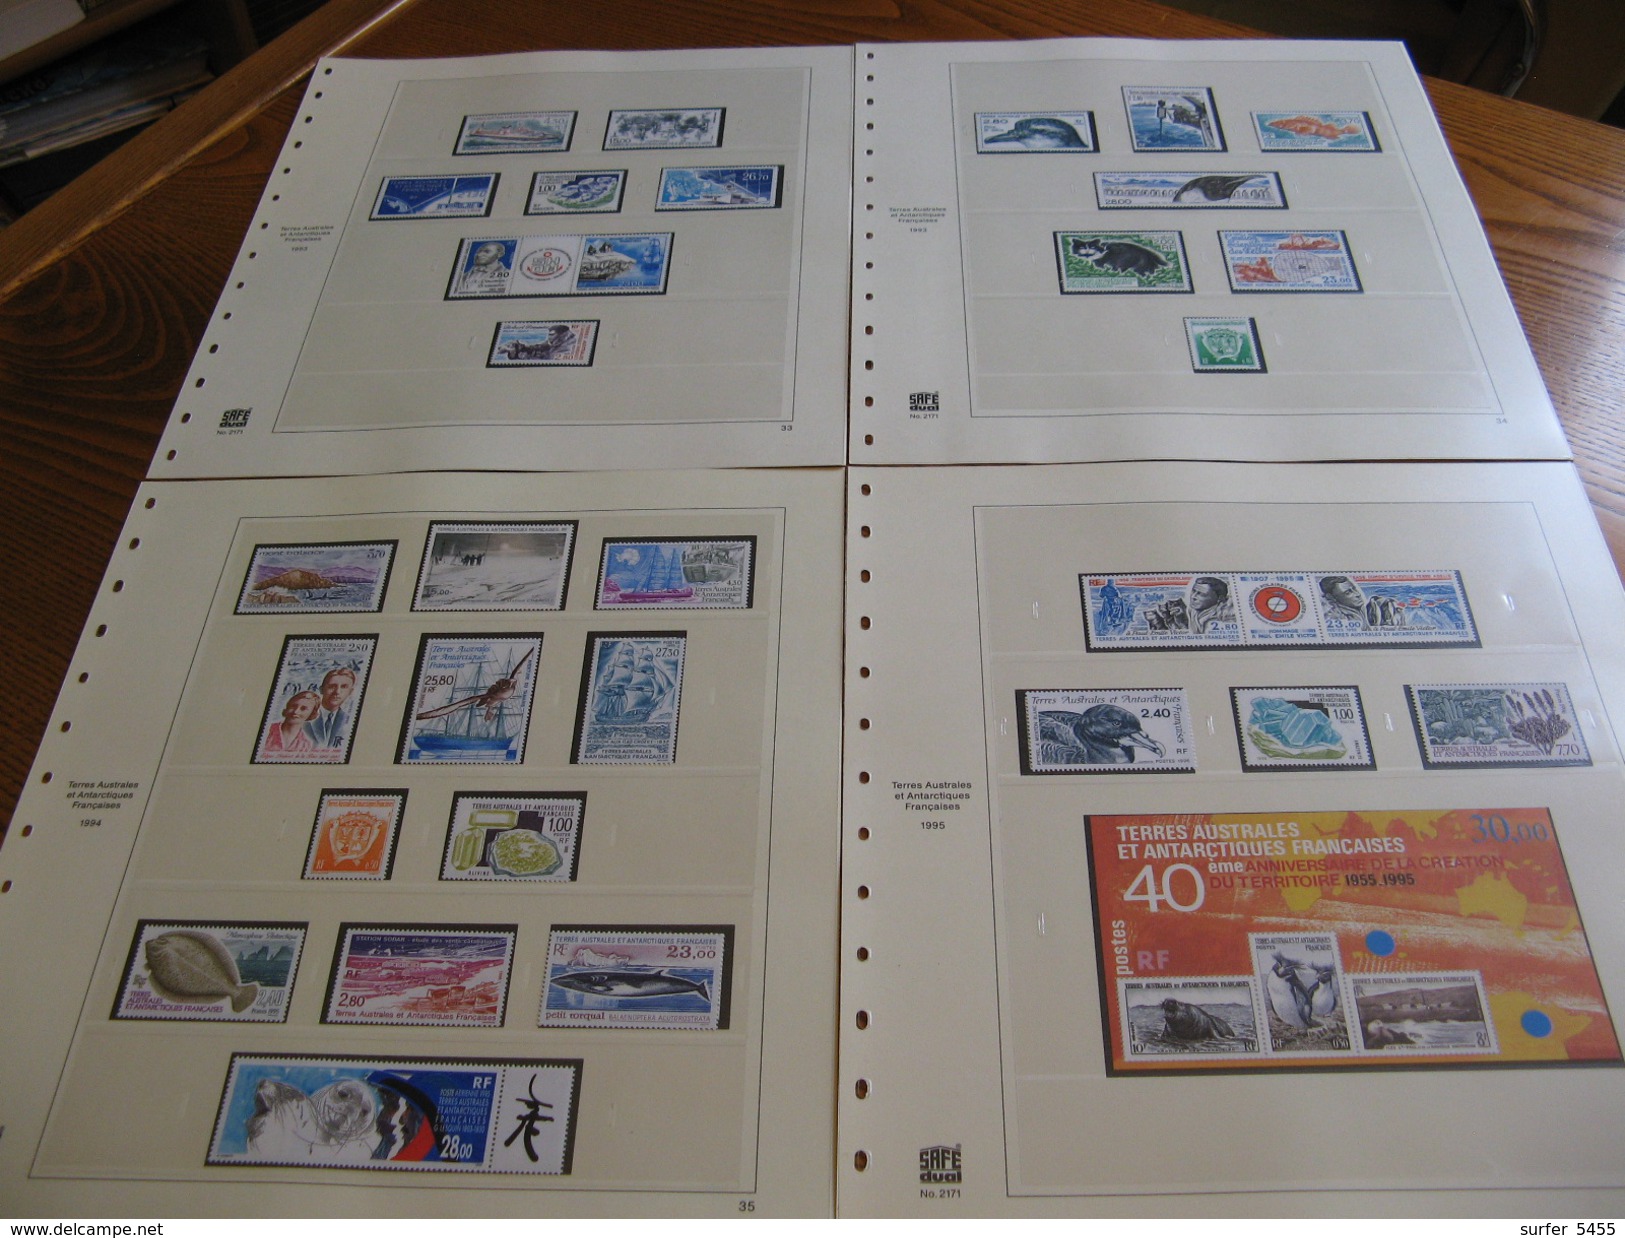 TAAF - PAYS COMPLET NEUF** LUXE - MNH - DE 1948 A 1998 - PO + PA + BF - COTE YVERT 5866,00 EUROS